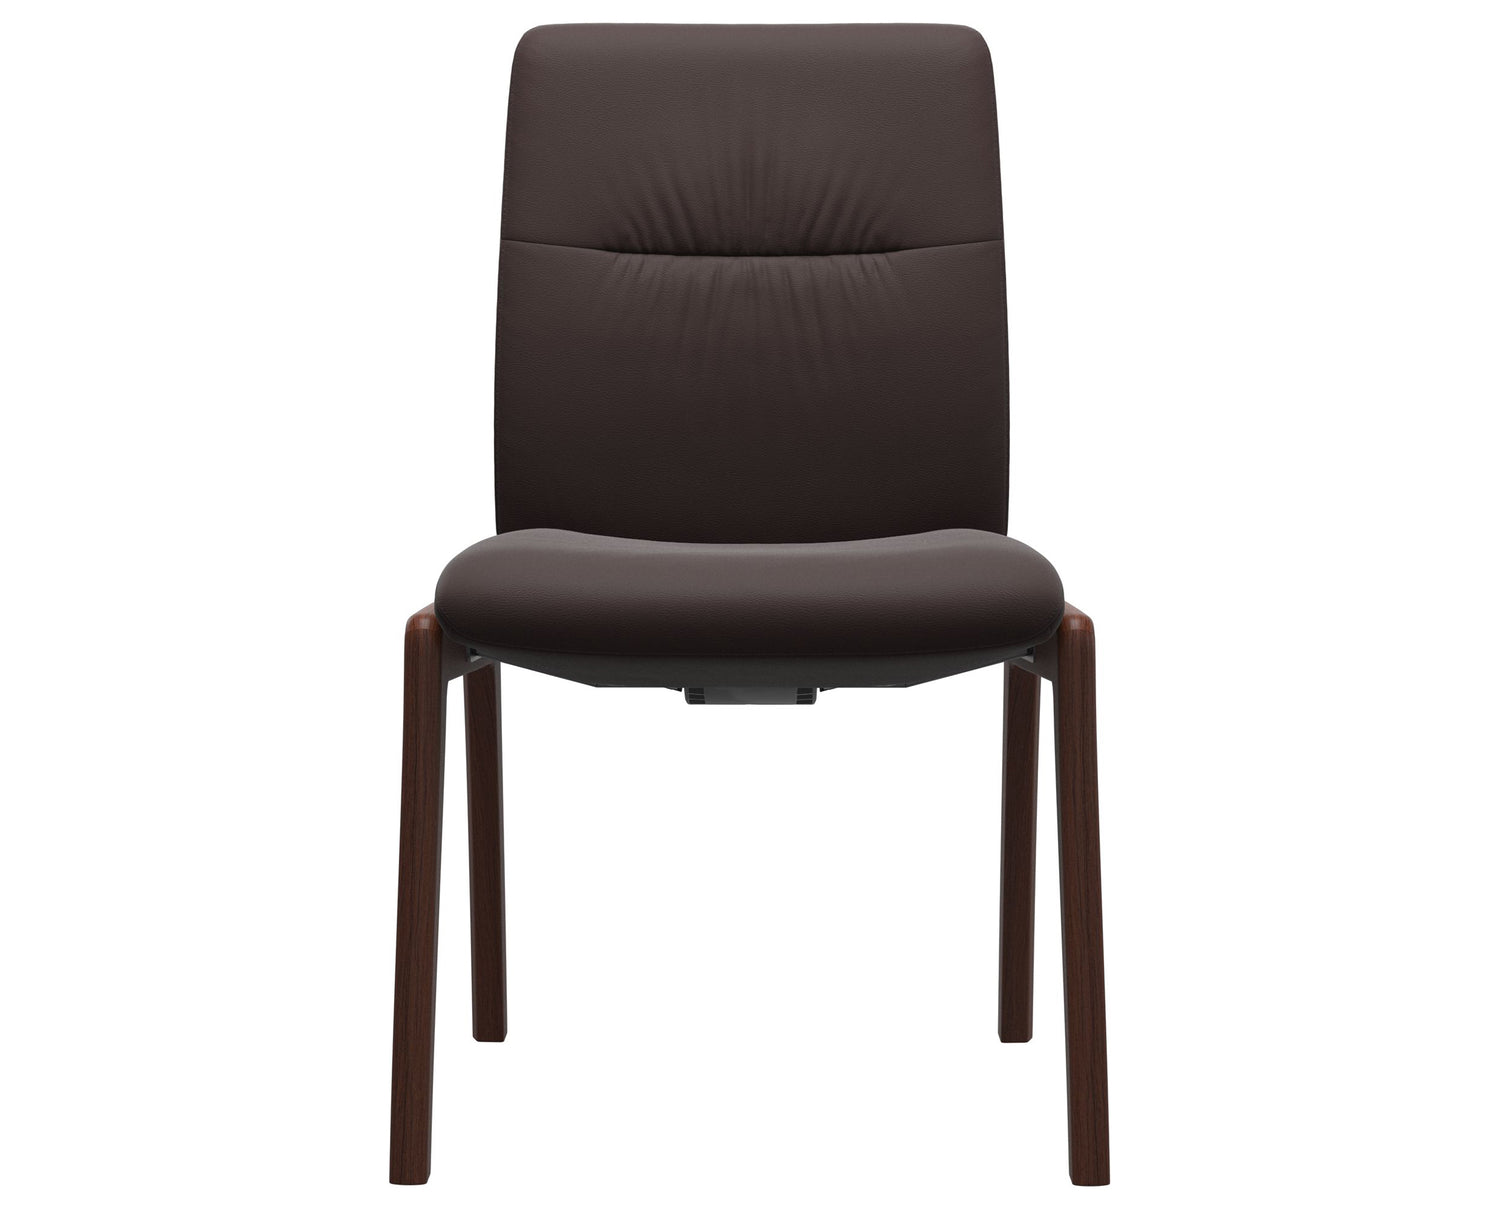 Paloma Leather Chocolate & Walnut Base | Stressless Mint Low Back D100 Dining Chair | Valley Ridge Furniture